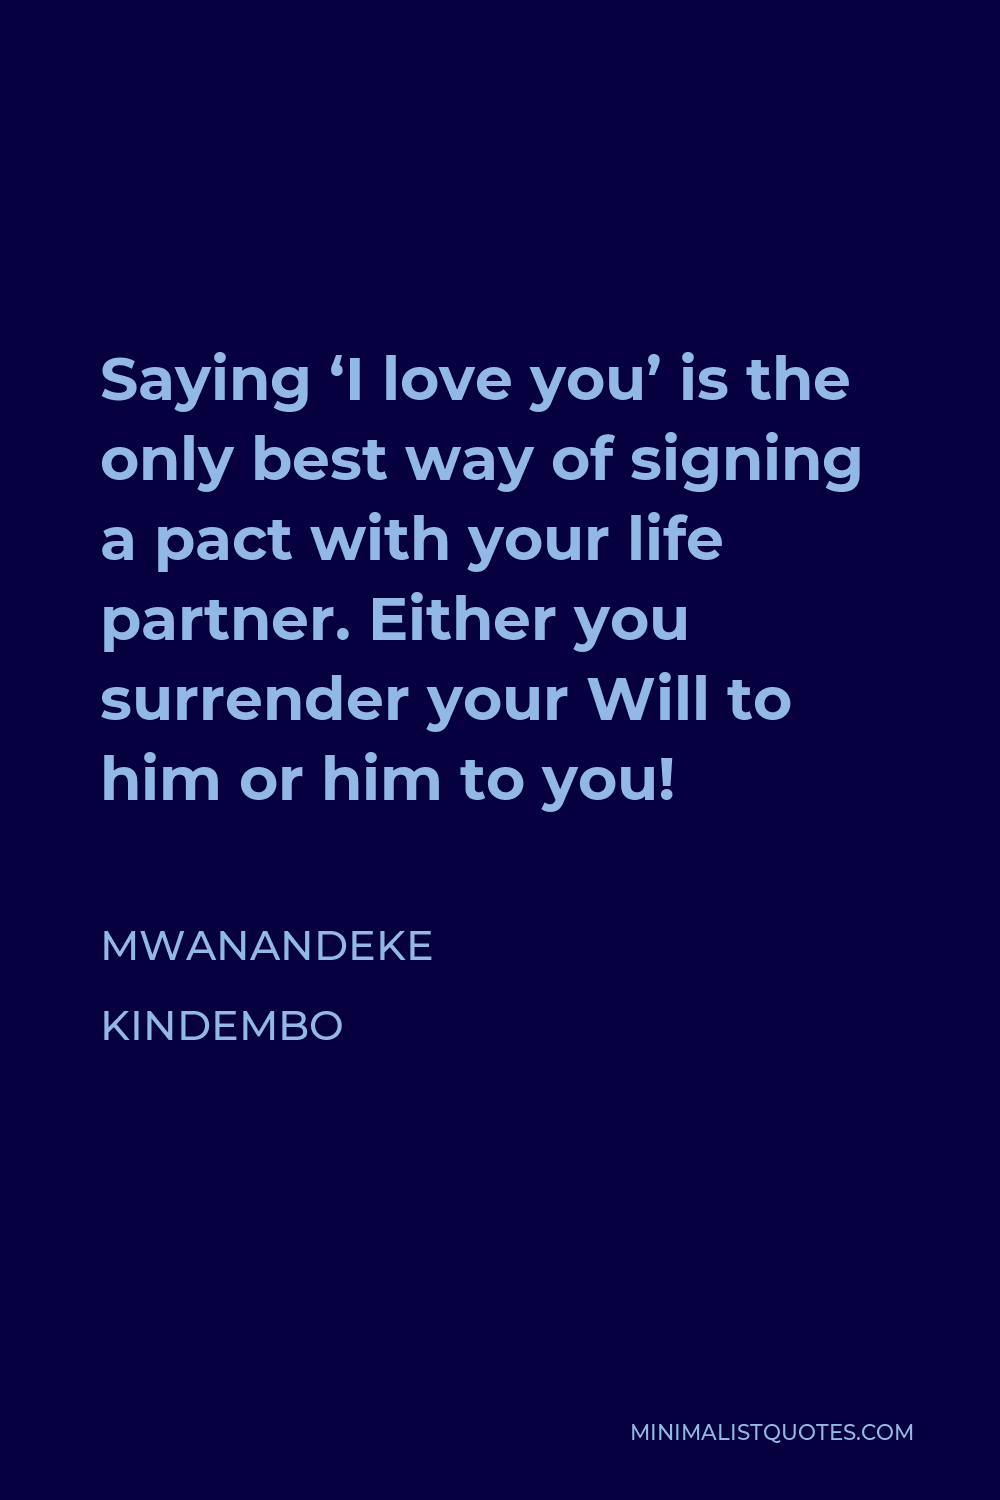 Mwanandeke Kindembo Quote - Saying ‘I love you’ is the only best way of signing a pact with your life partner. Either you surrender your Will to him or him to you!